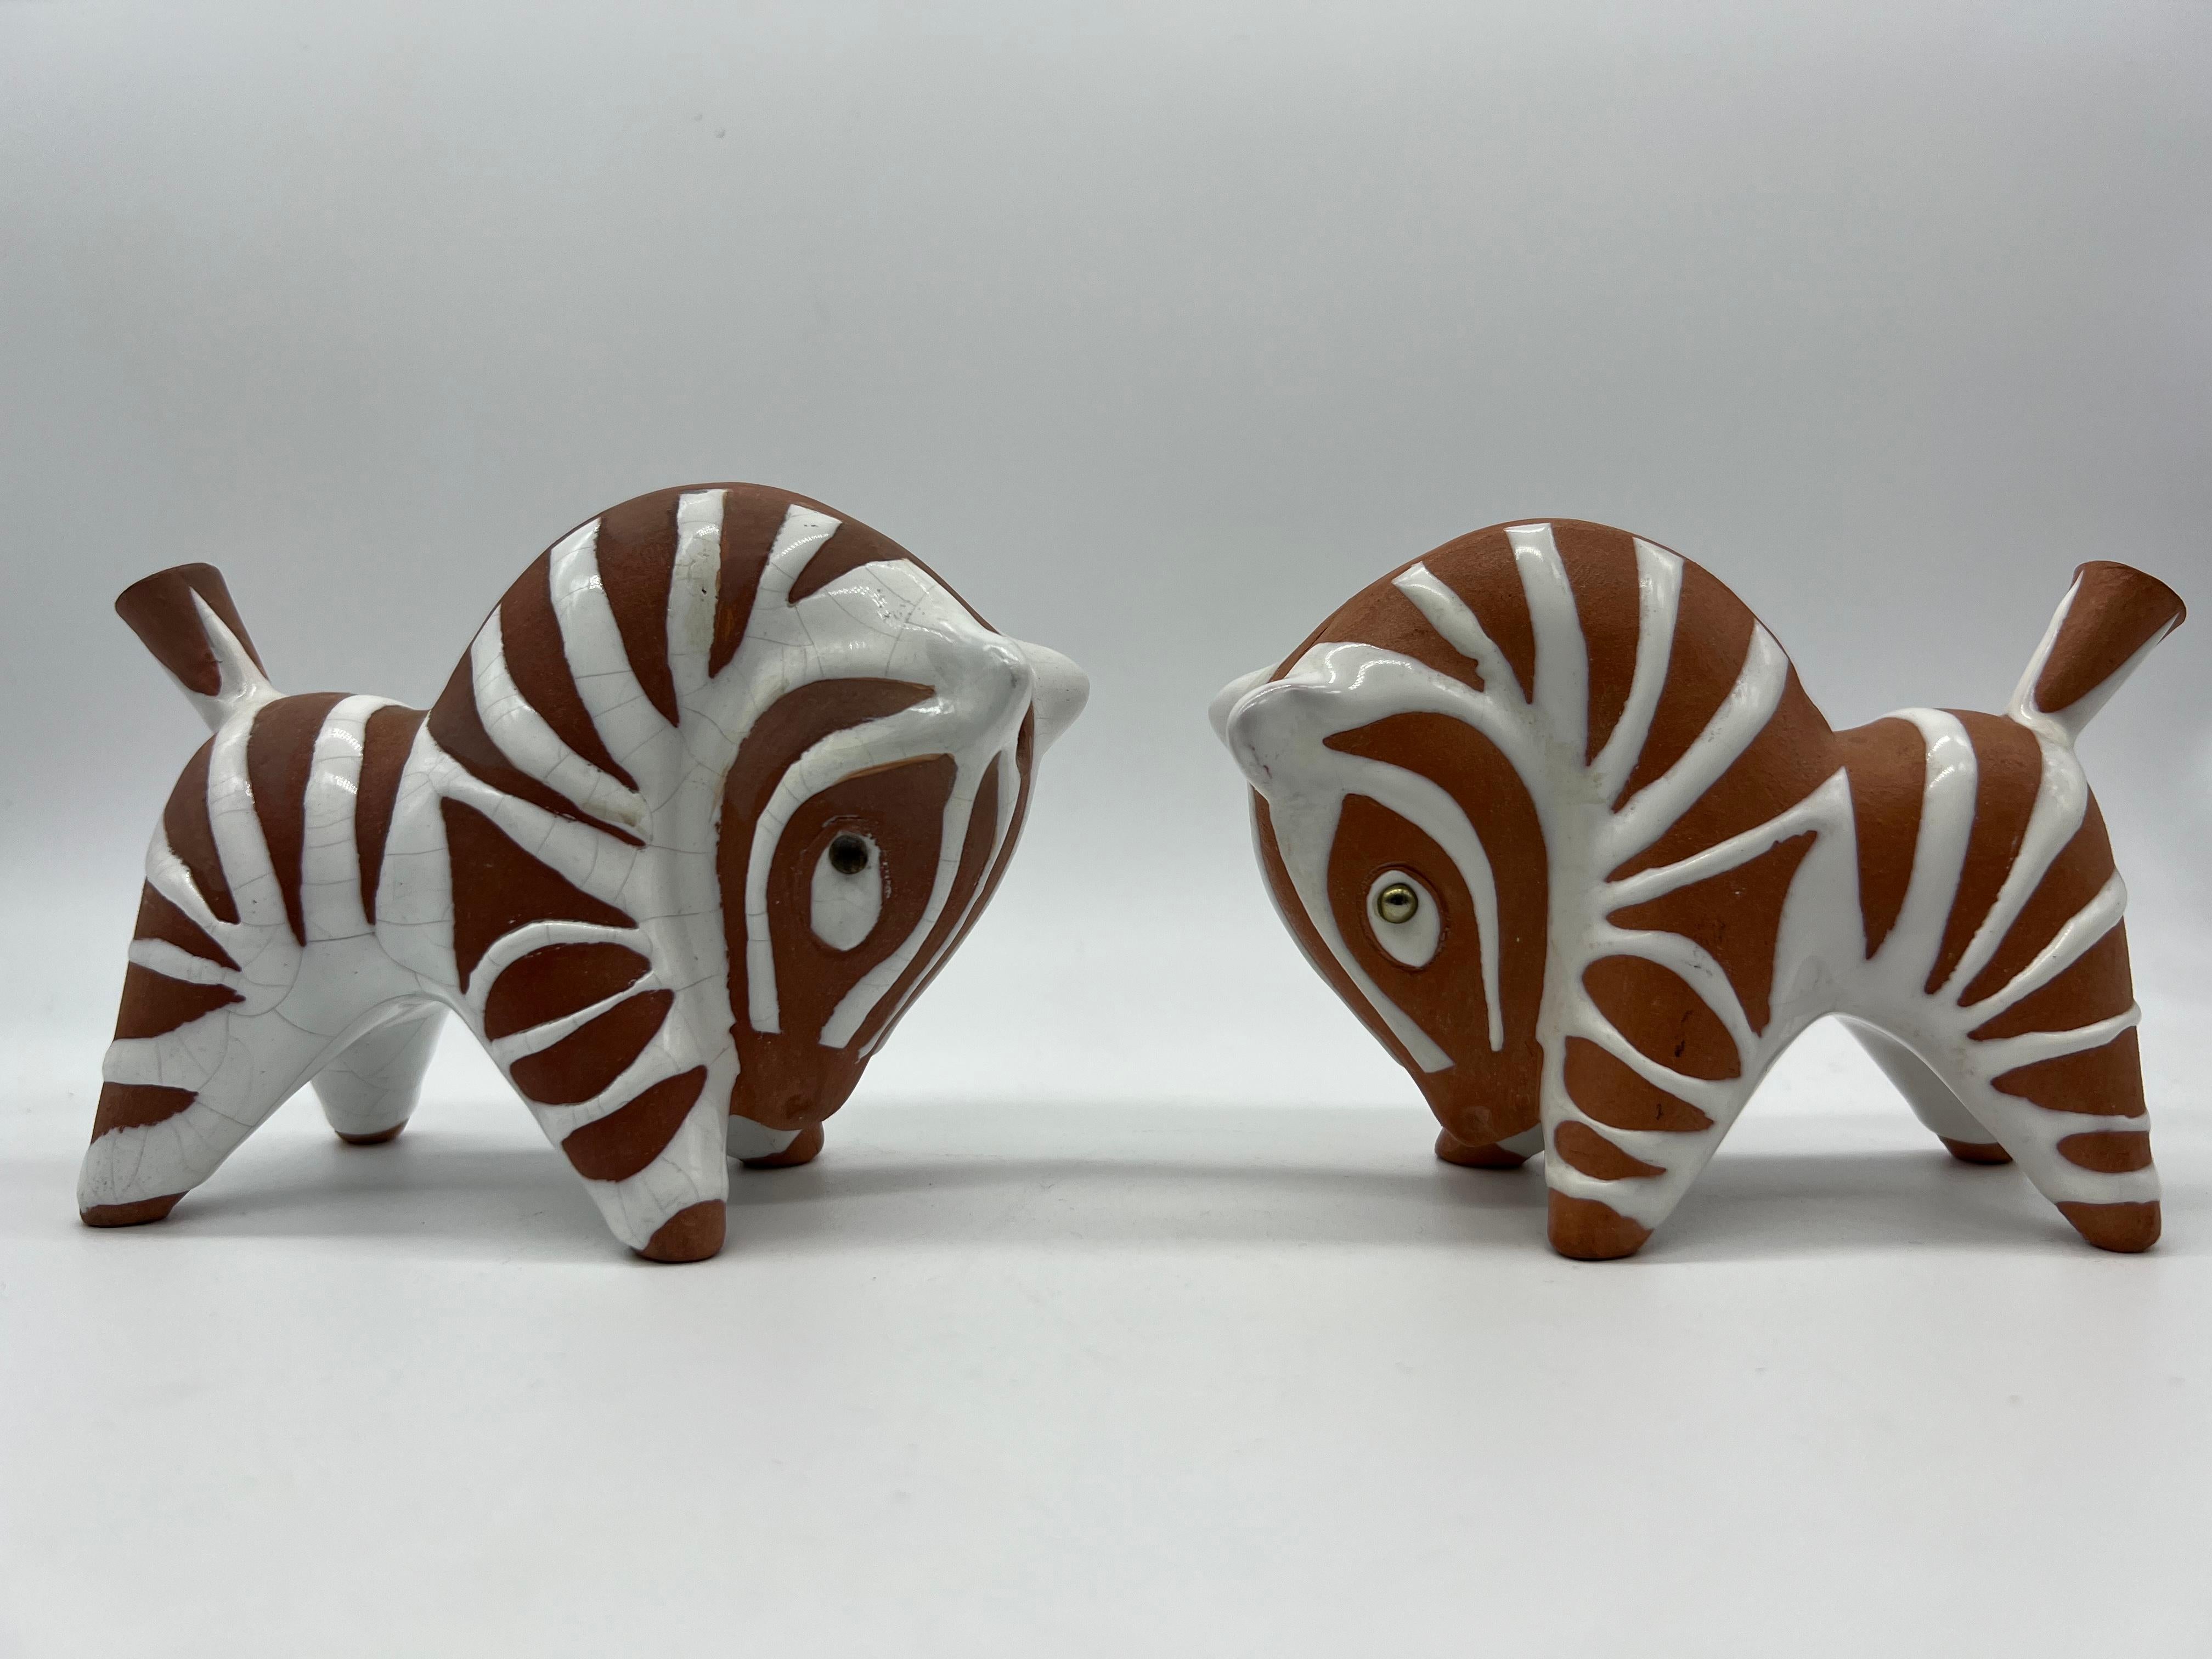 Ceramic toothpick horses, by Leopold Anzengruber, from Vienna, Austria, mid-19th century, good condition.